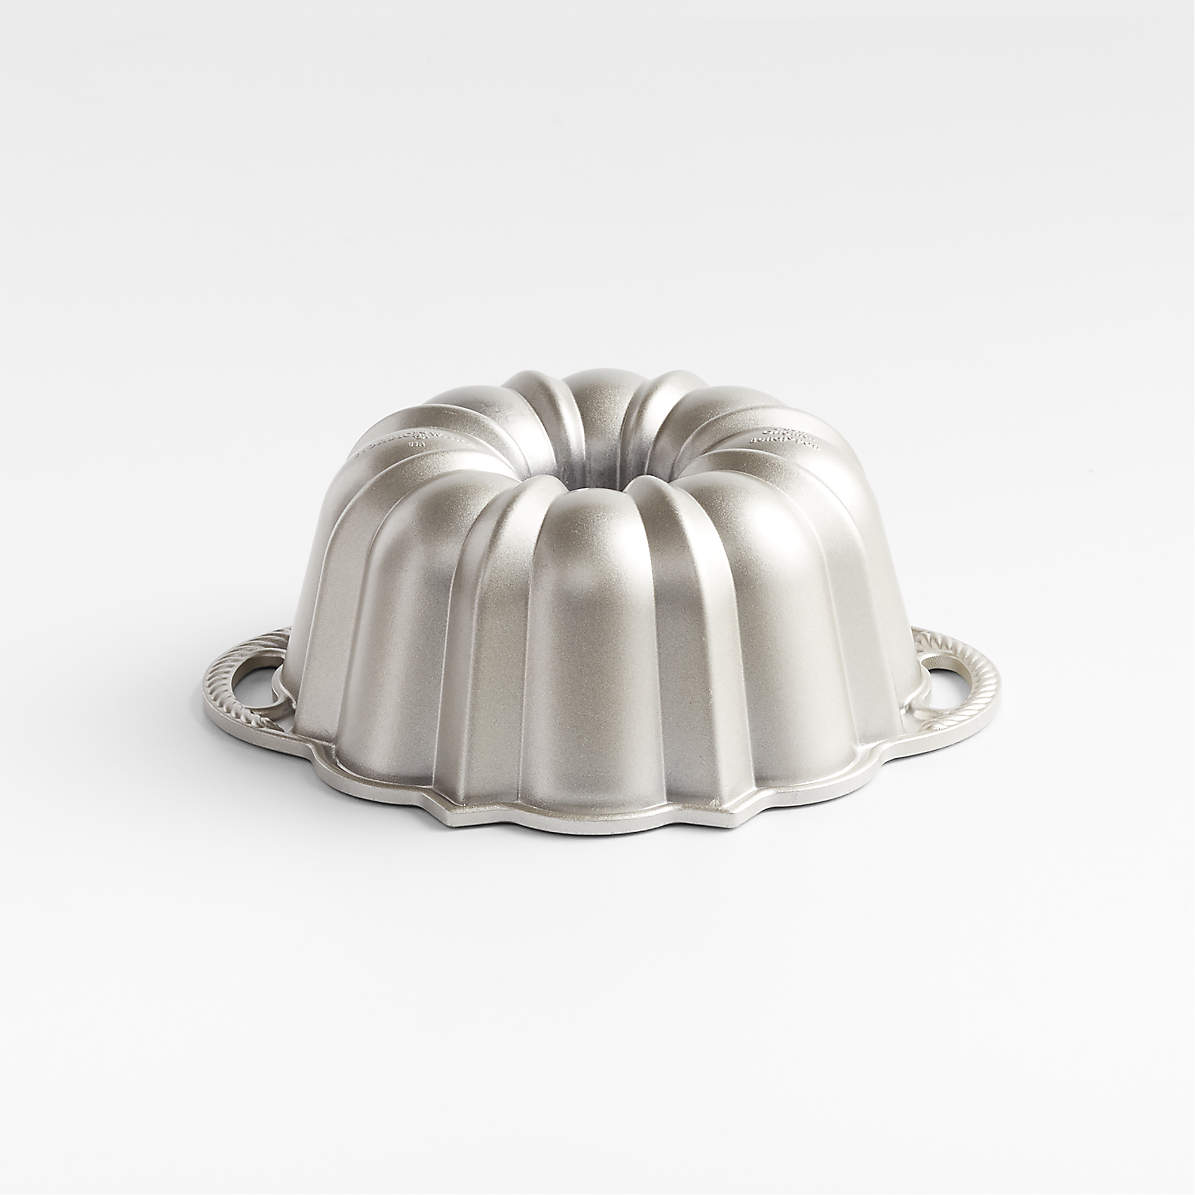 Classic Cast Pound Cake and Angelfood Pan - Nordic Ware